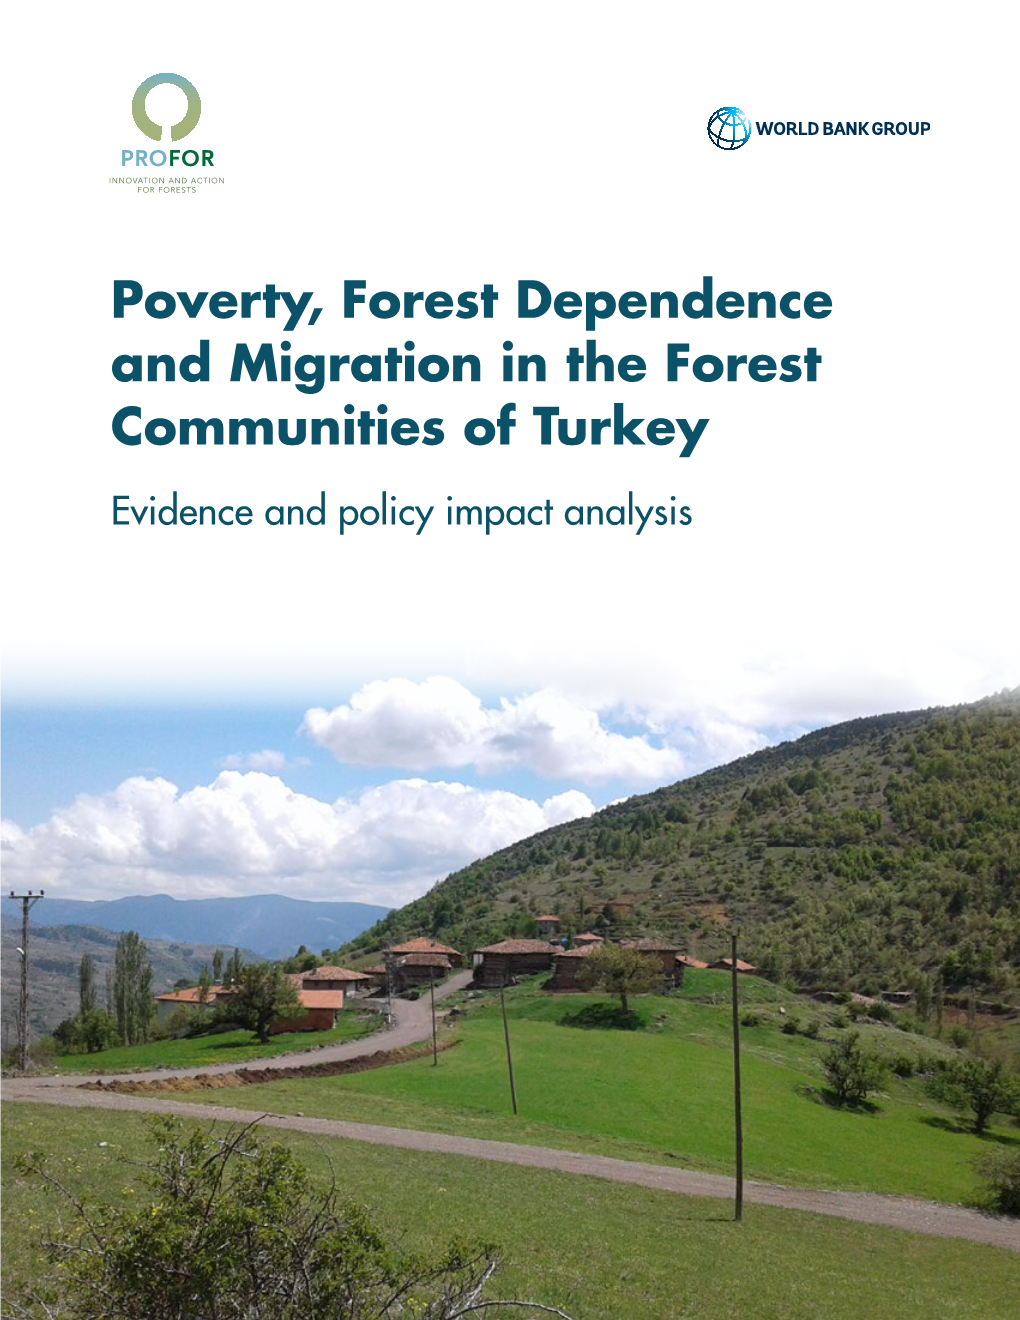 Poverty, Forest Dependence and Migration in Forest